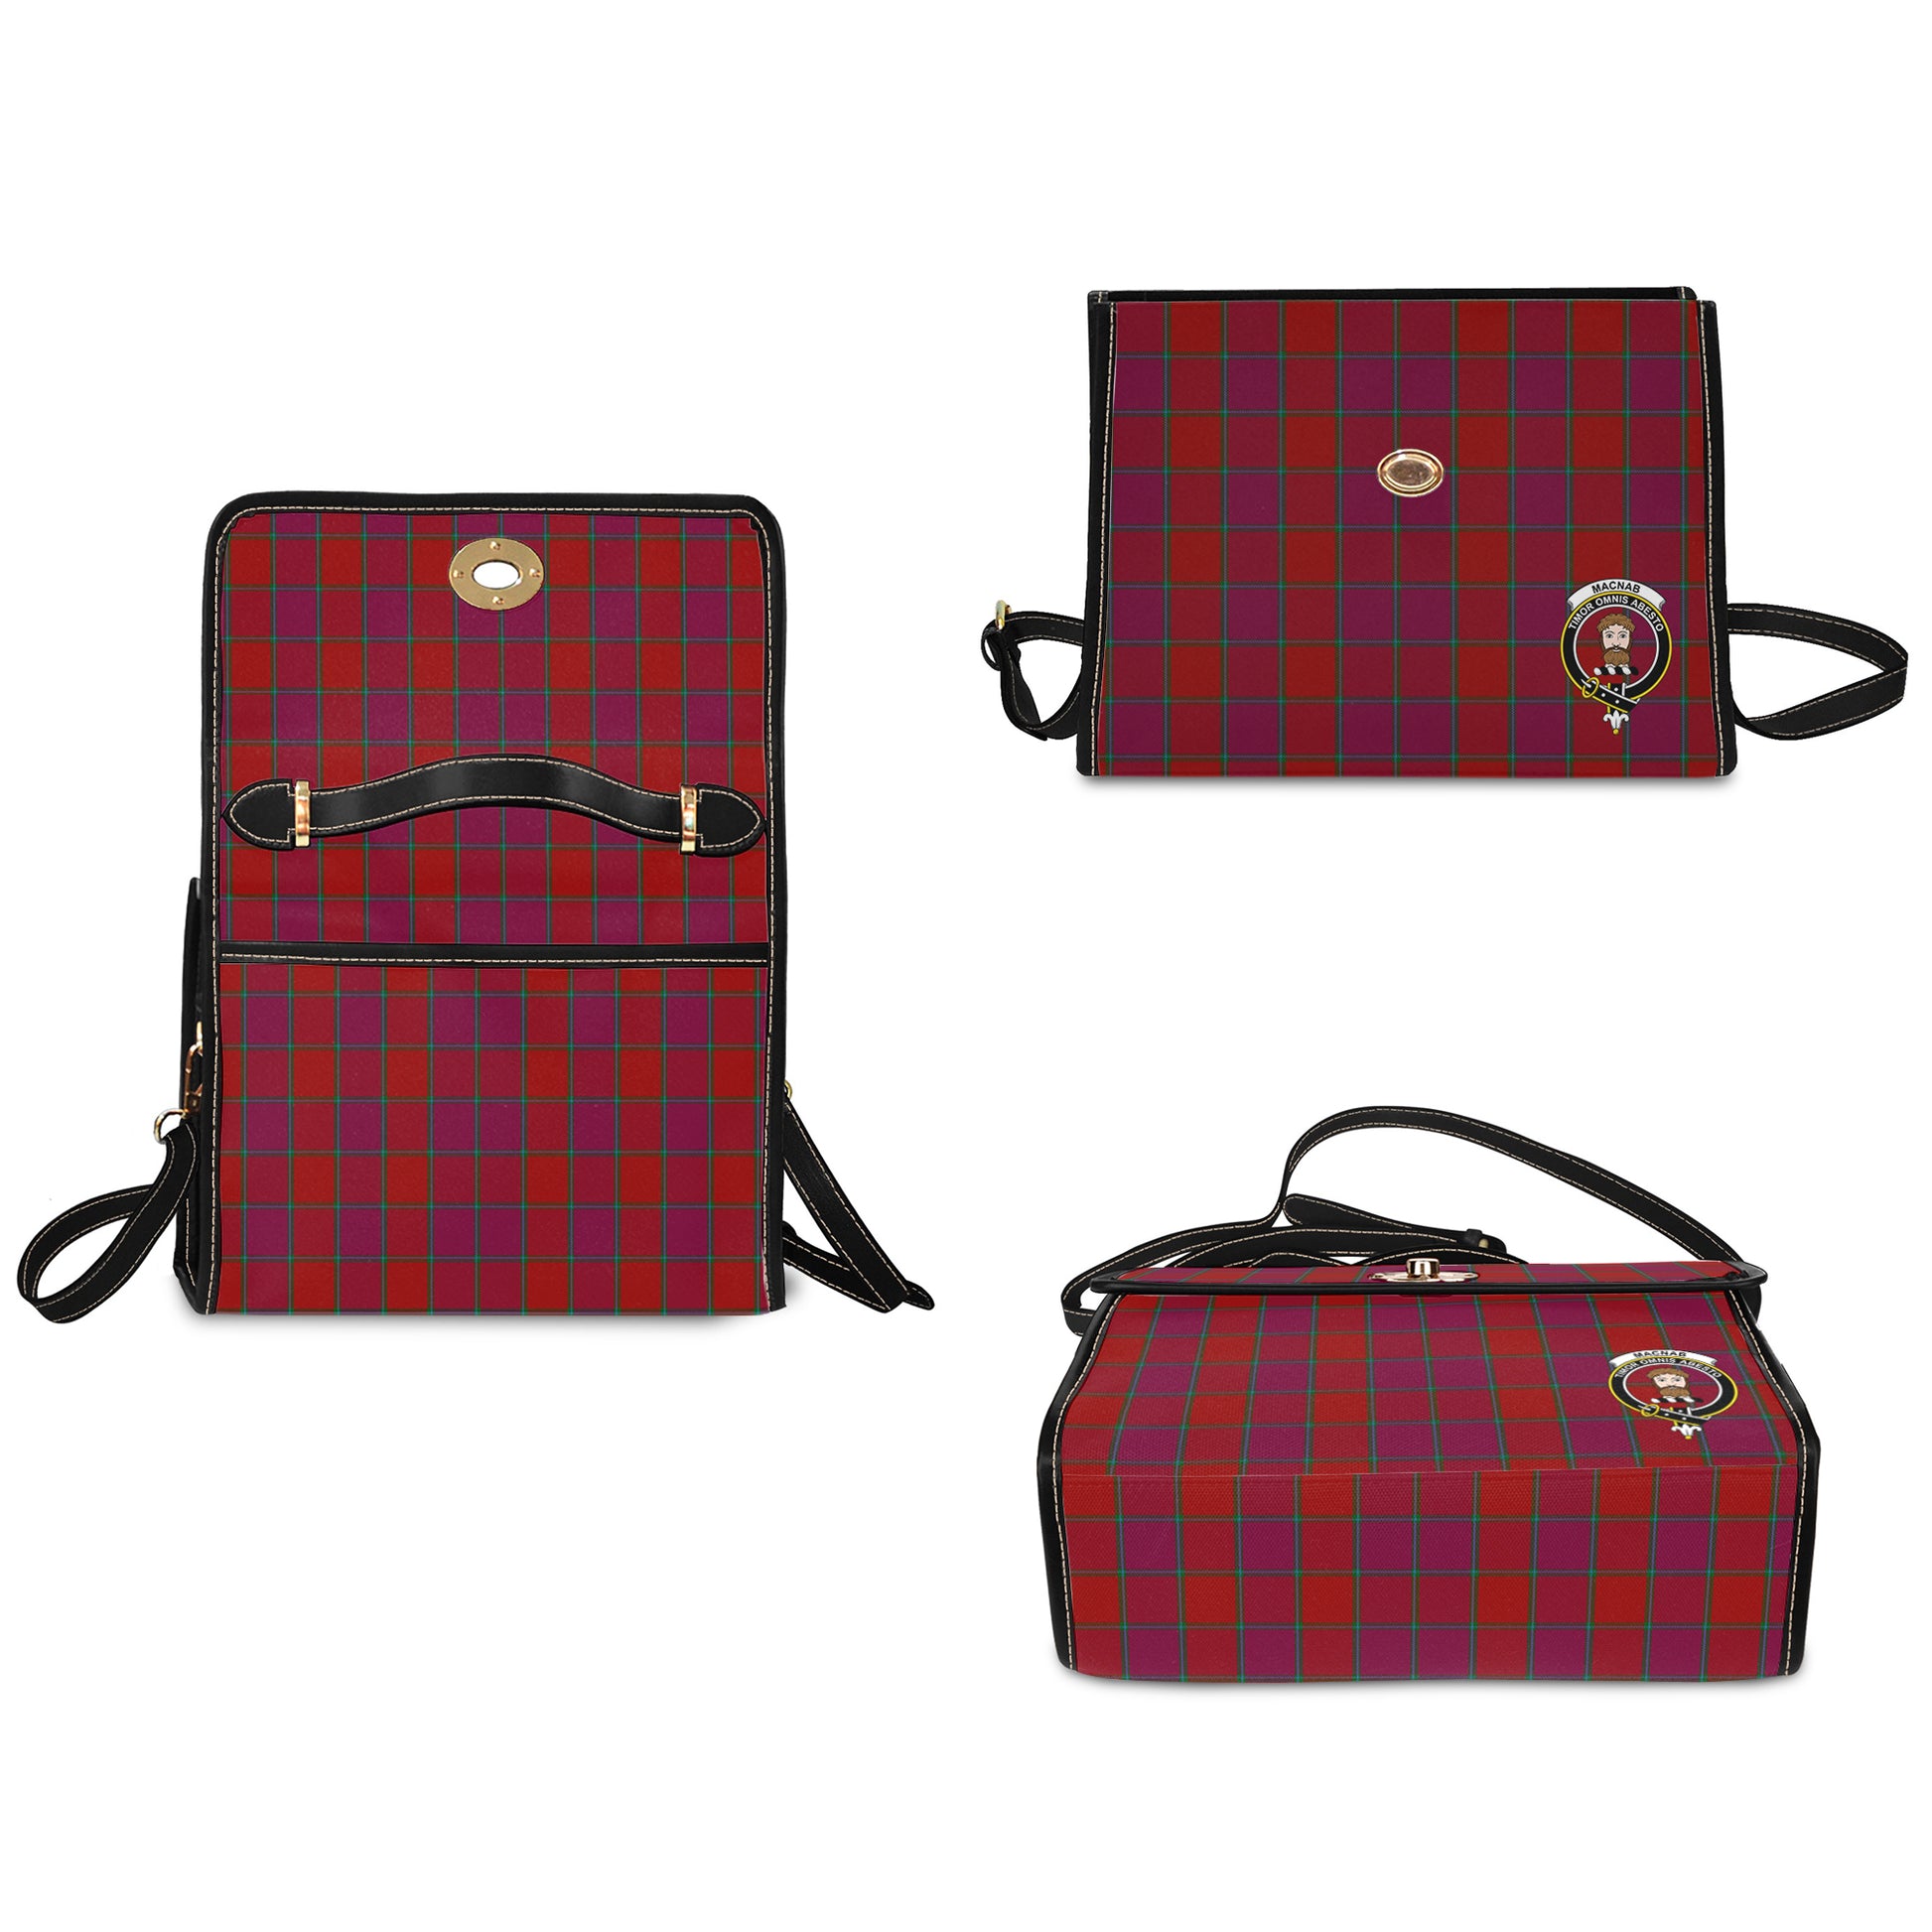 macnab-old-tartan-leather-strap-waterproof-canvas-bag-with-family-crest